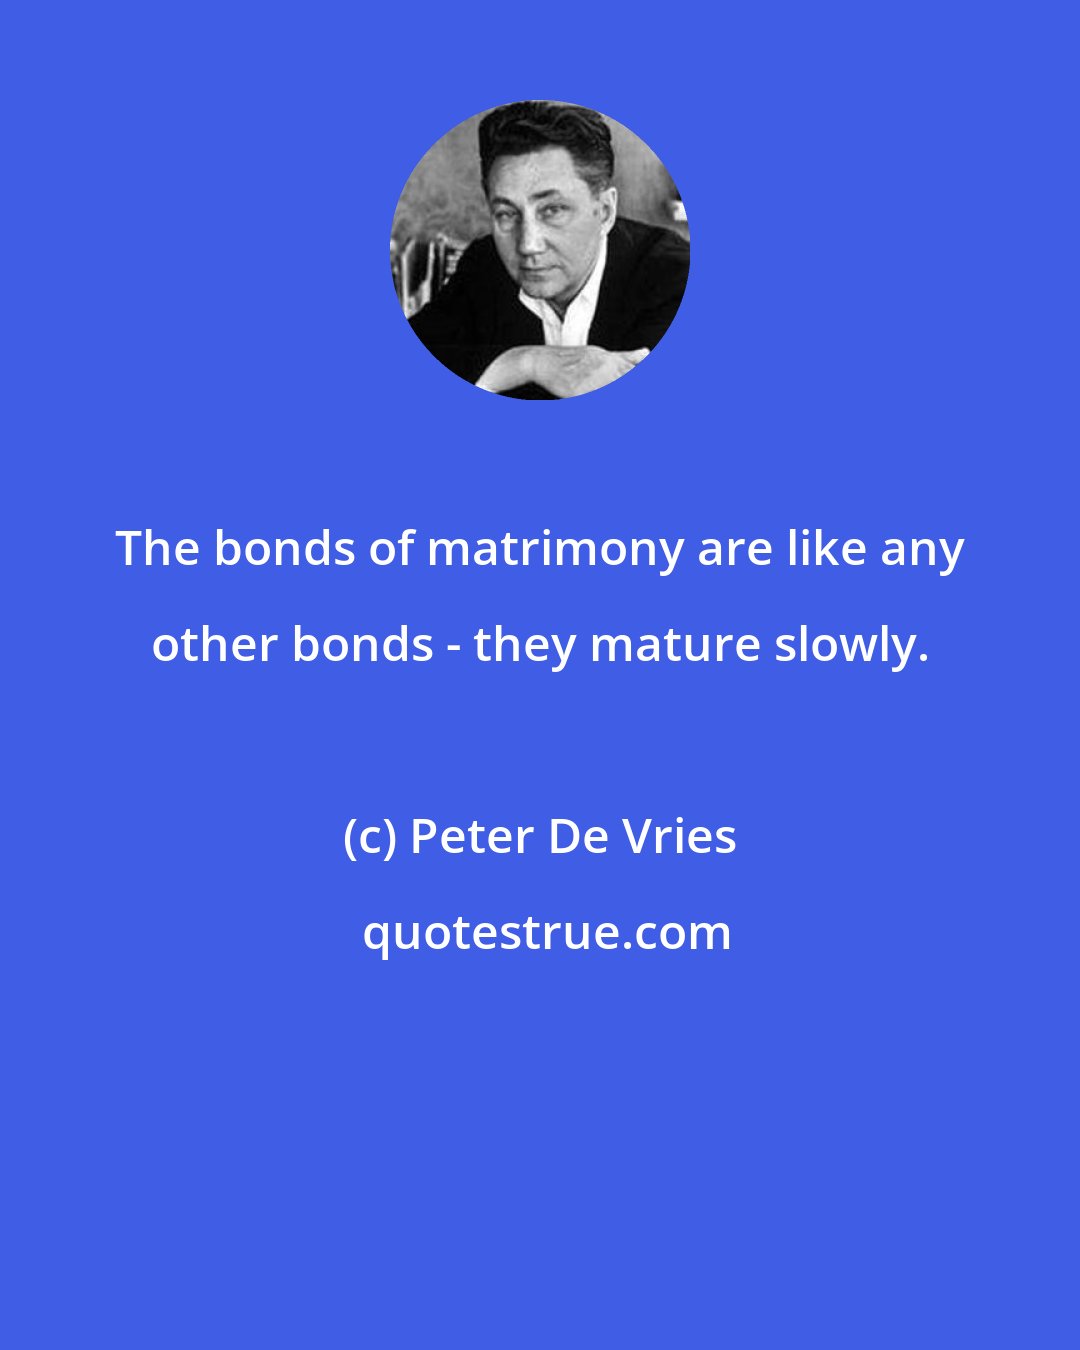 Peter De Vries: The bonds of matrimony are like any other bonds - they mature slowly.